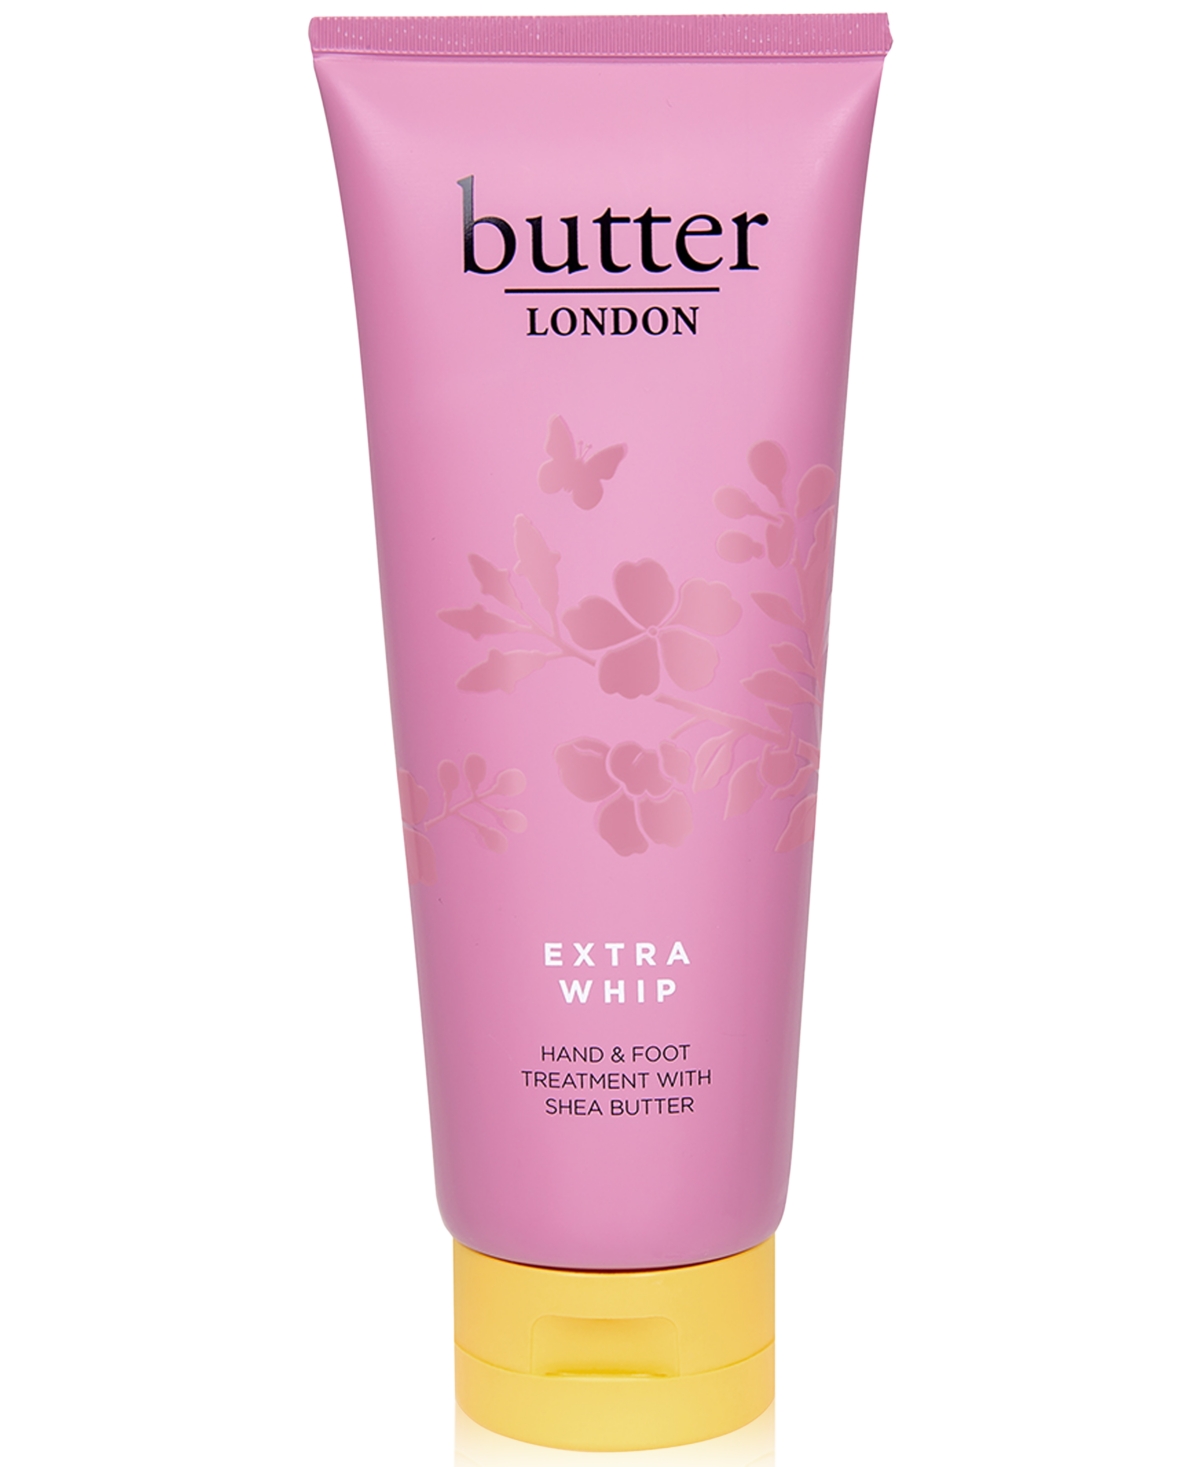 Butter London Jumbo Extra Whip Hand & Foot Treatment With Shea Butter, 7 Oz.